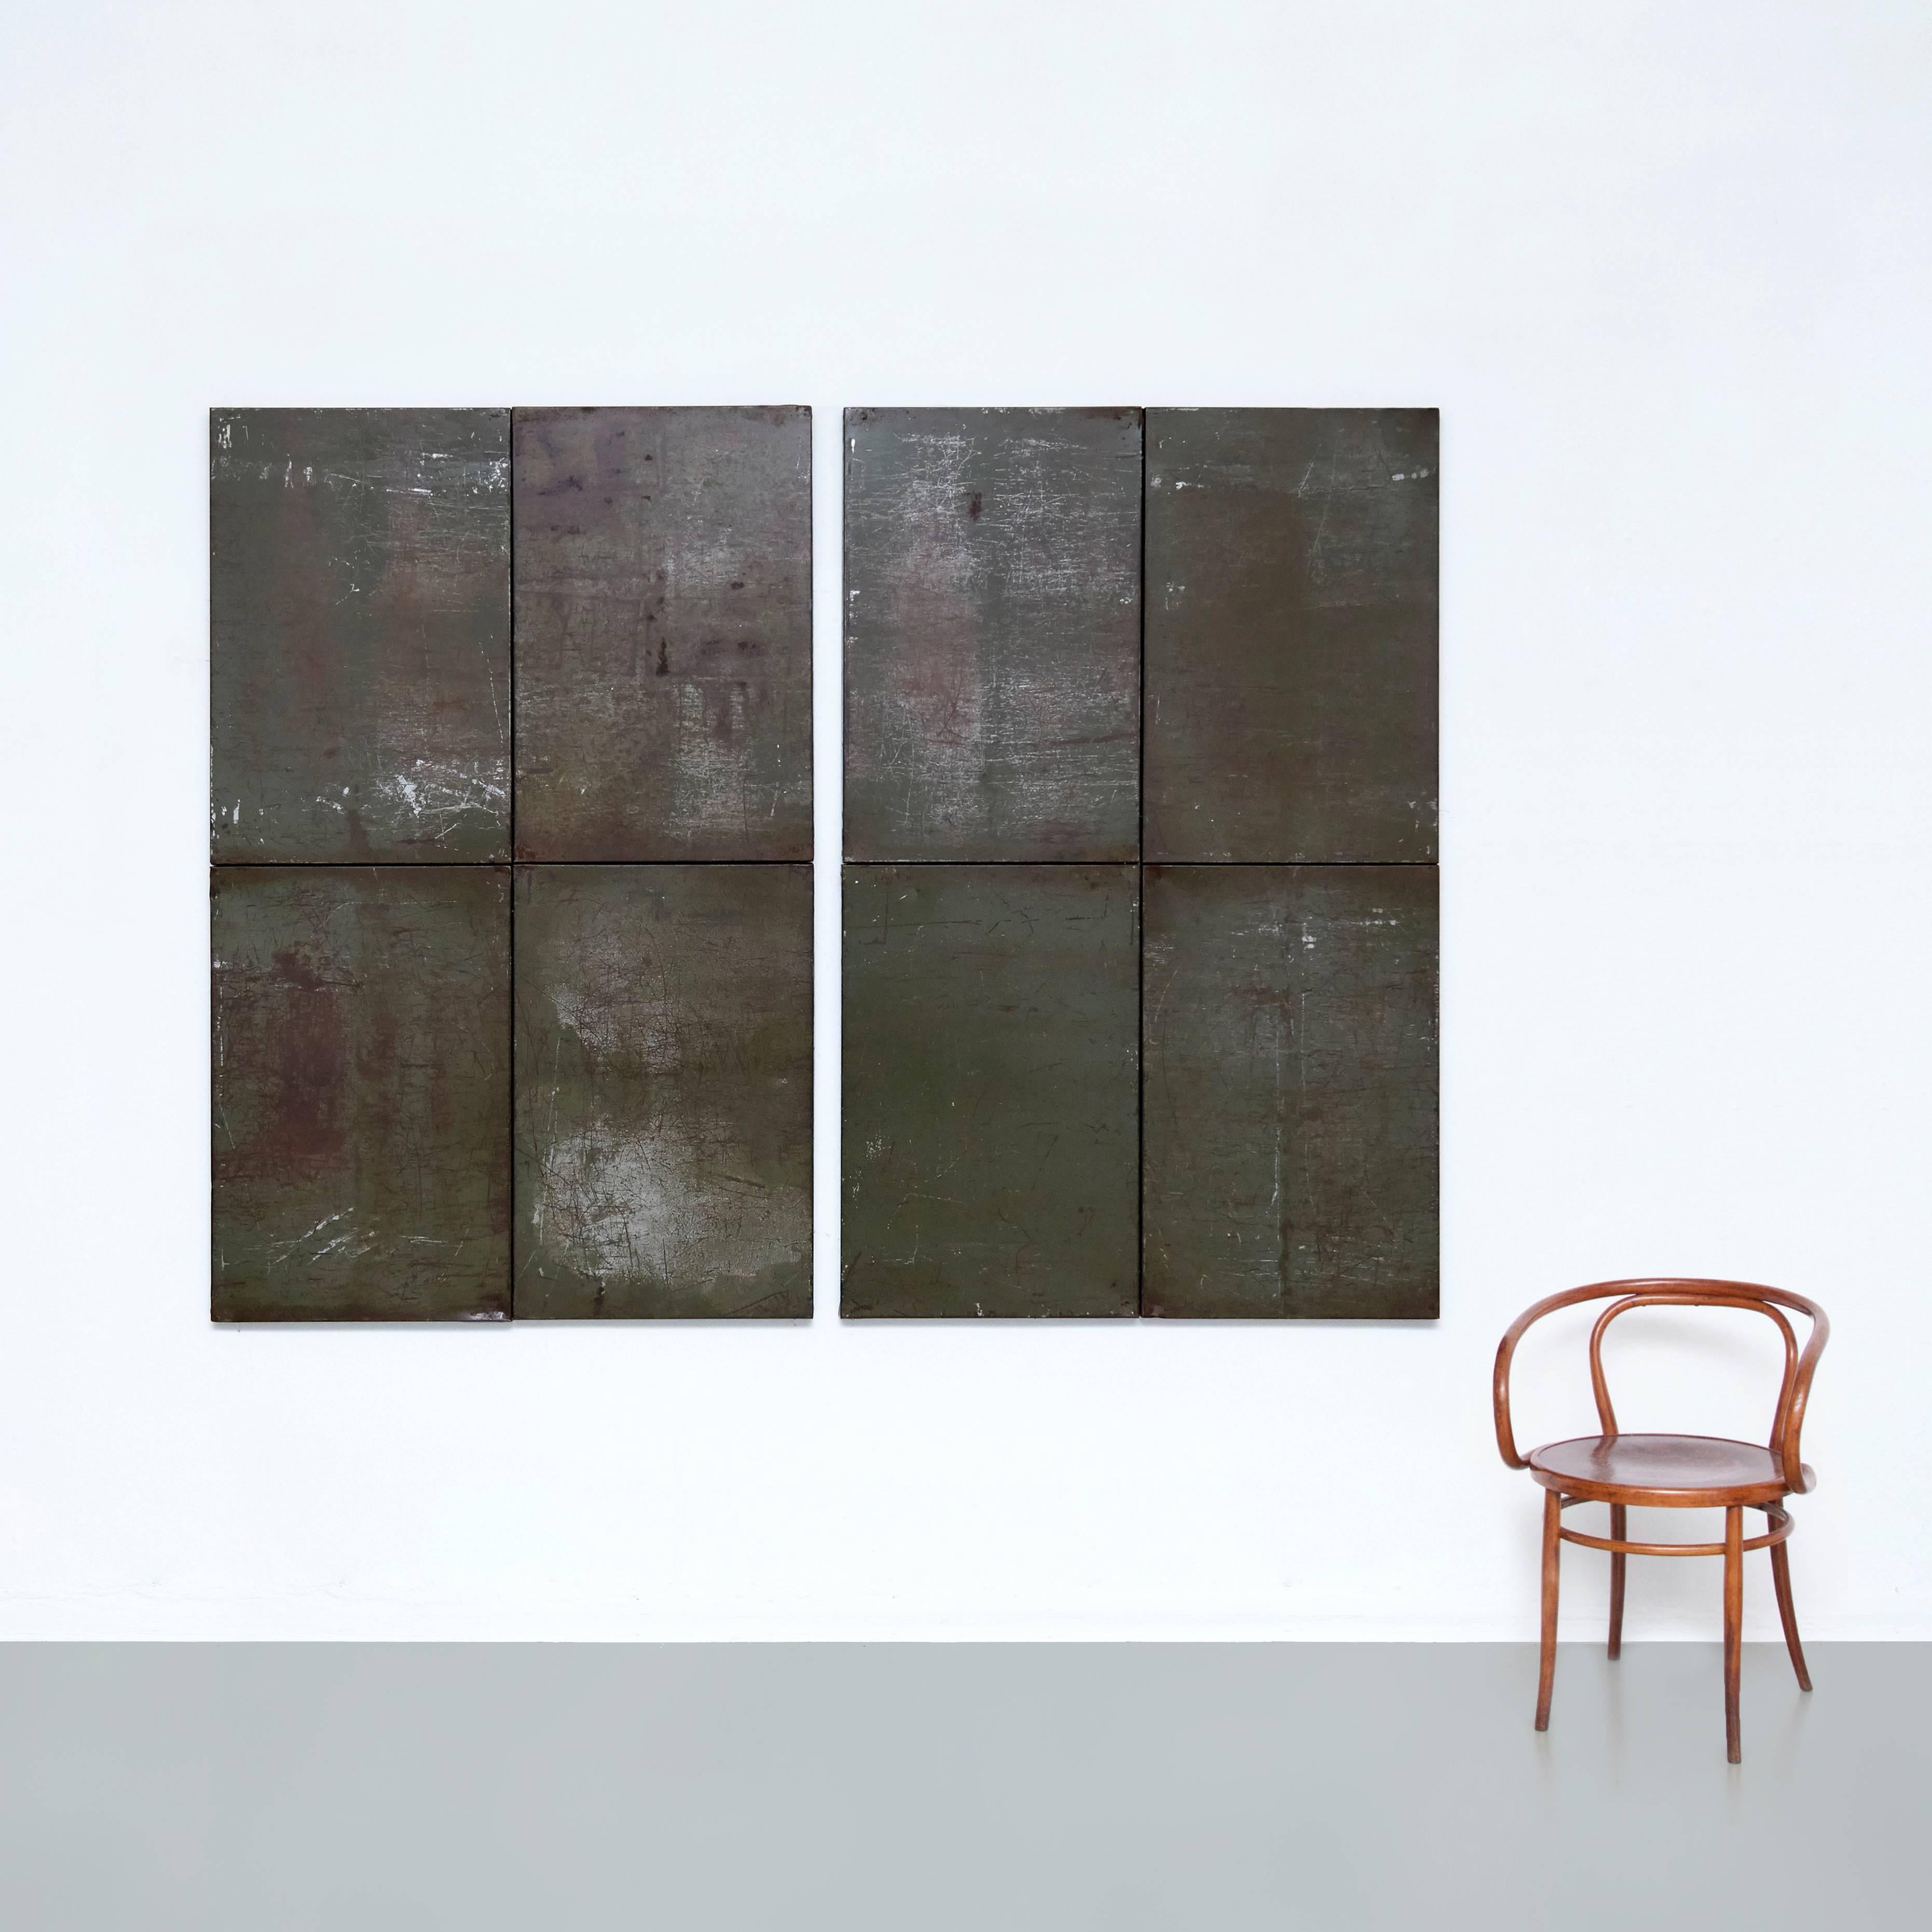 Ramon Horts, Minimalism large artwork diptych.

Measures: 120cm W x 180 cm H each one.

Sturctures of metal compositions made in Barcelona, circa 2016. For a solo exhibition.
Signed by himself in engraving punch.

Scraped metal, rusted and